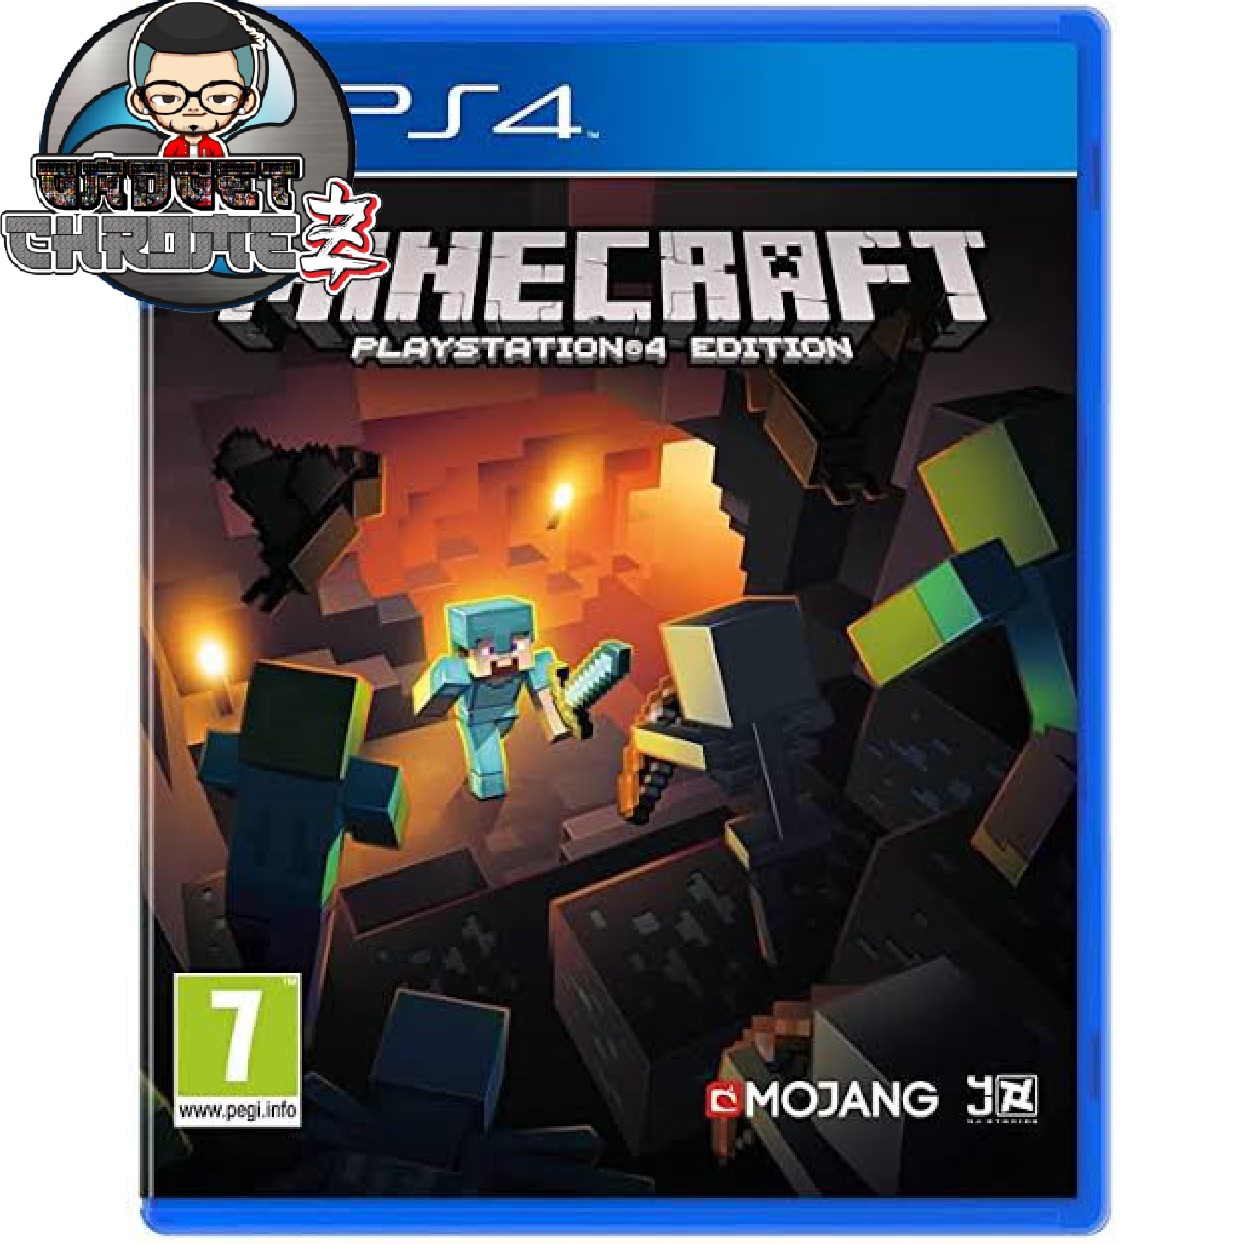 minecraft for playstation 2